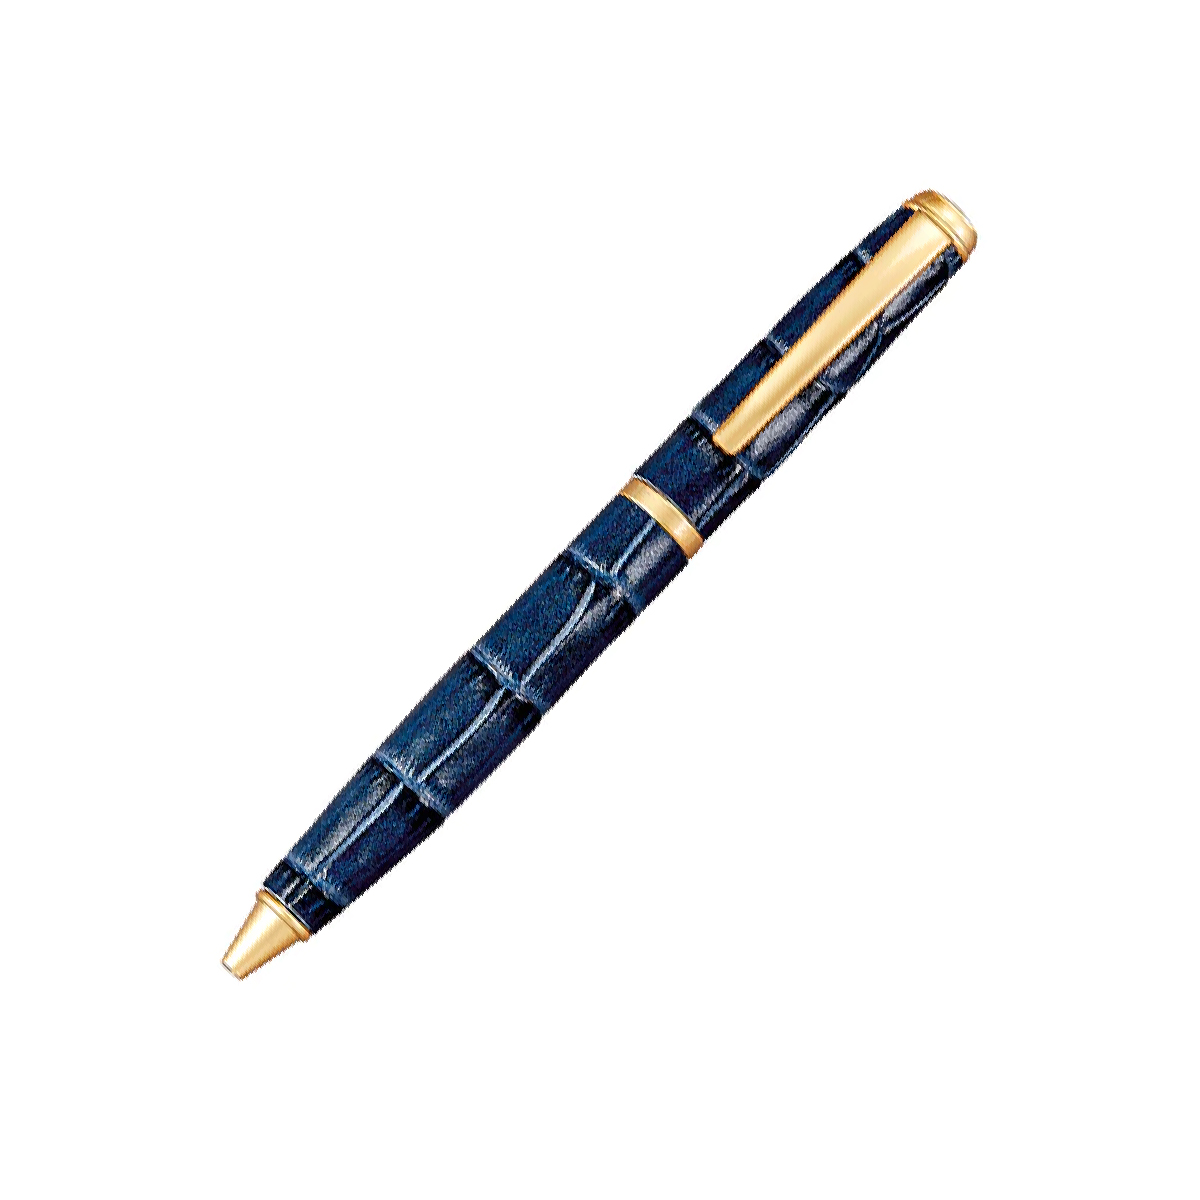 Graphic Image - Sapphire Blue Crocodile Leather Wrapped Pen